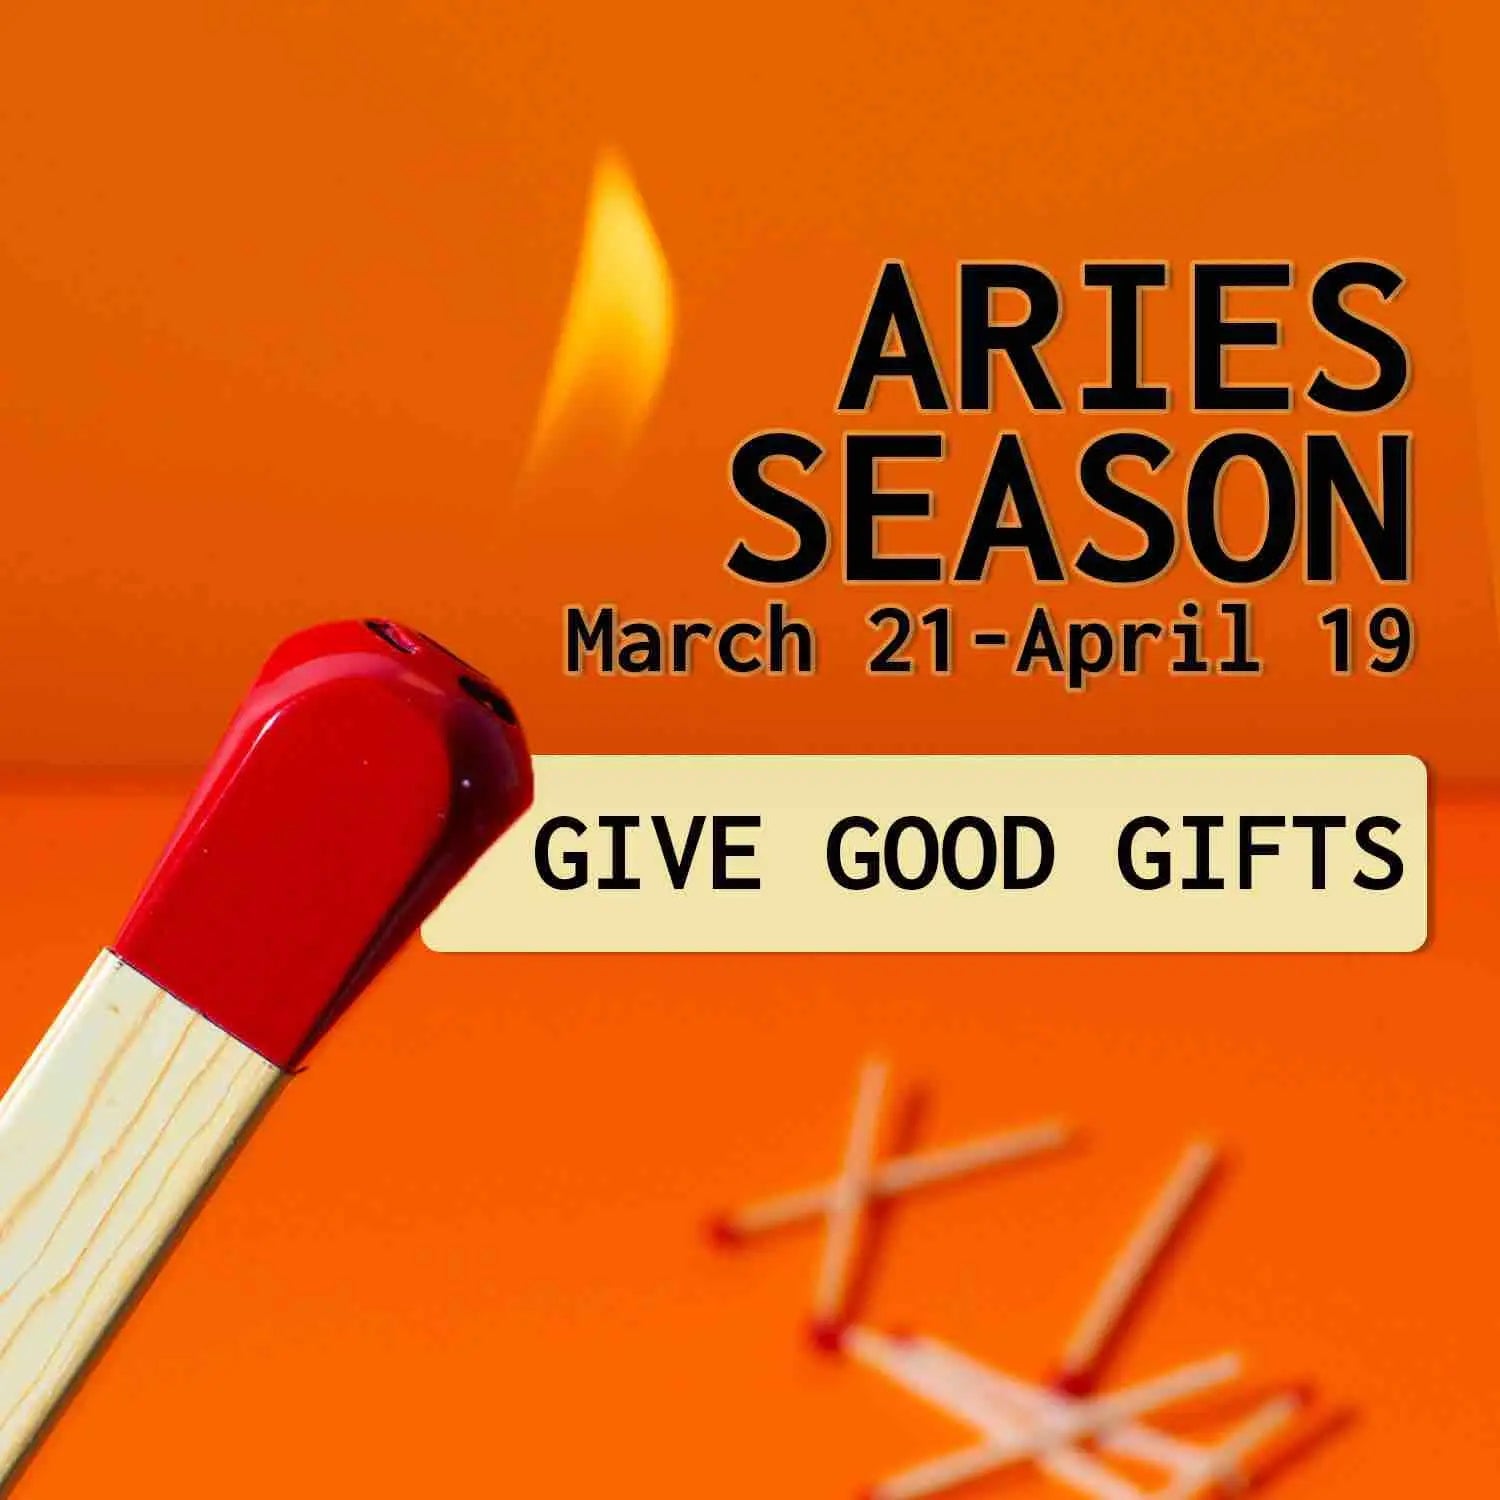 Gifts for Aries Season - March 21st through April 19th